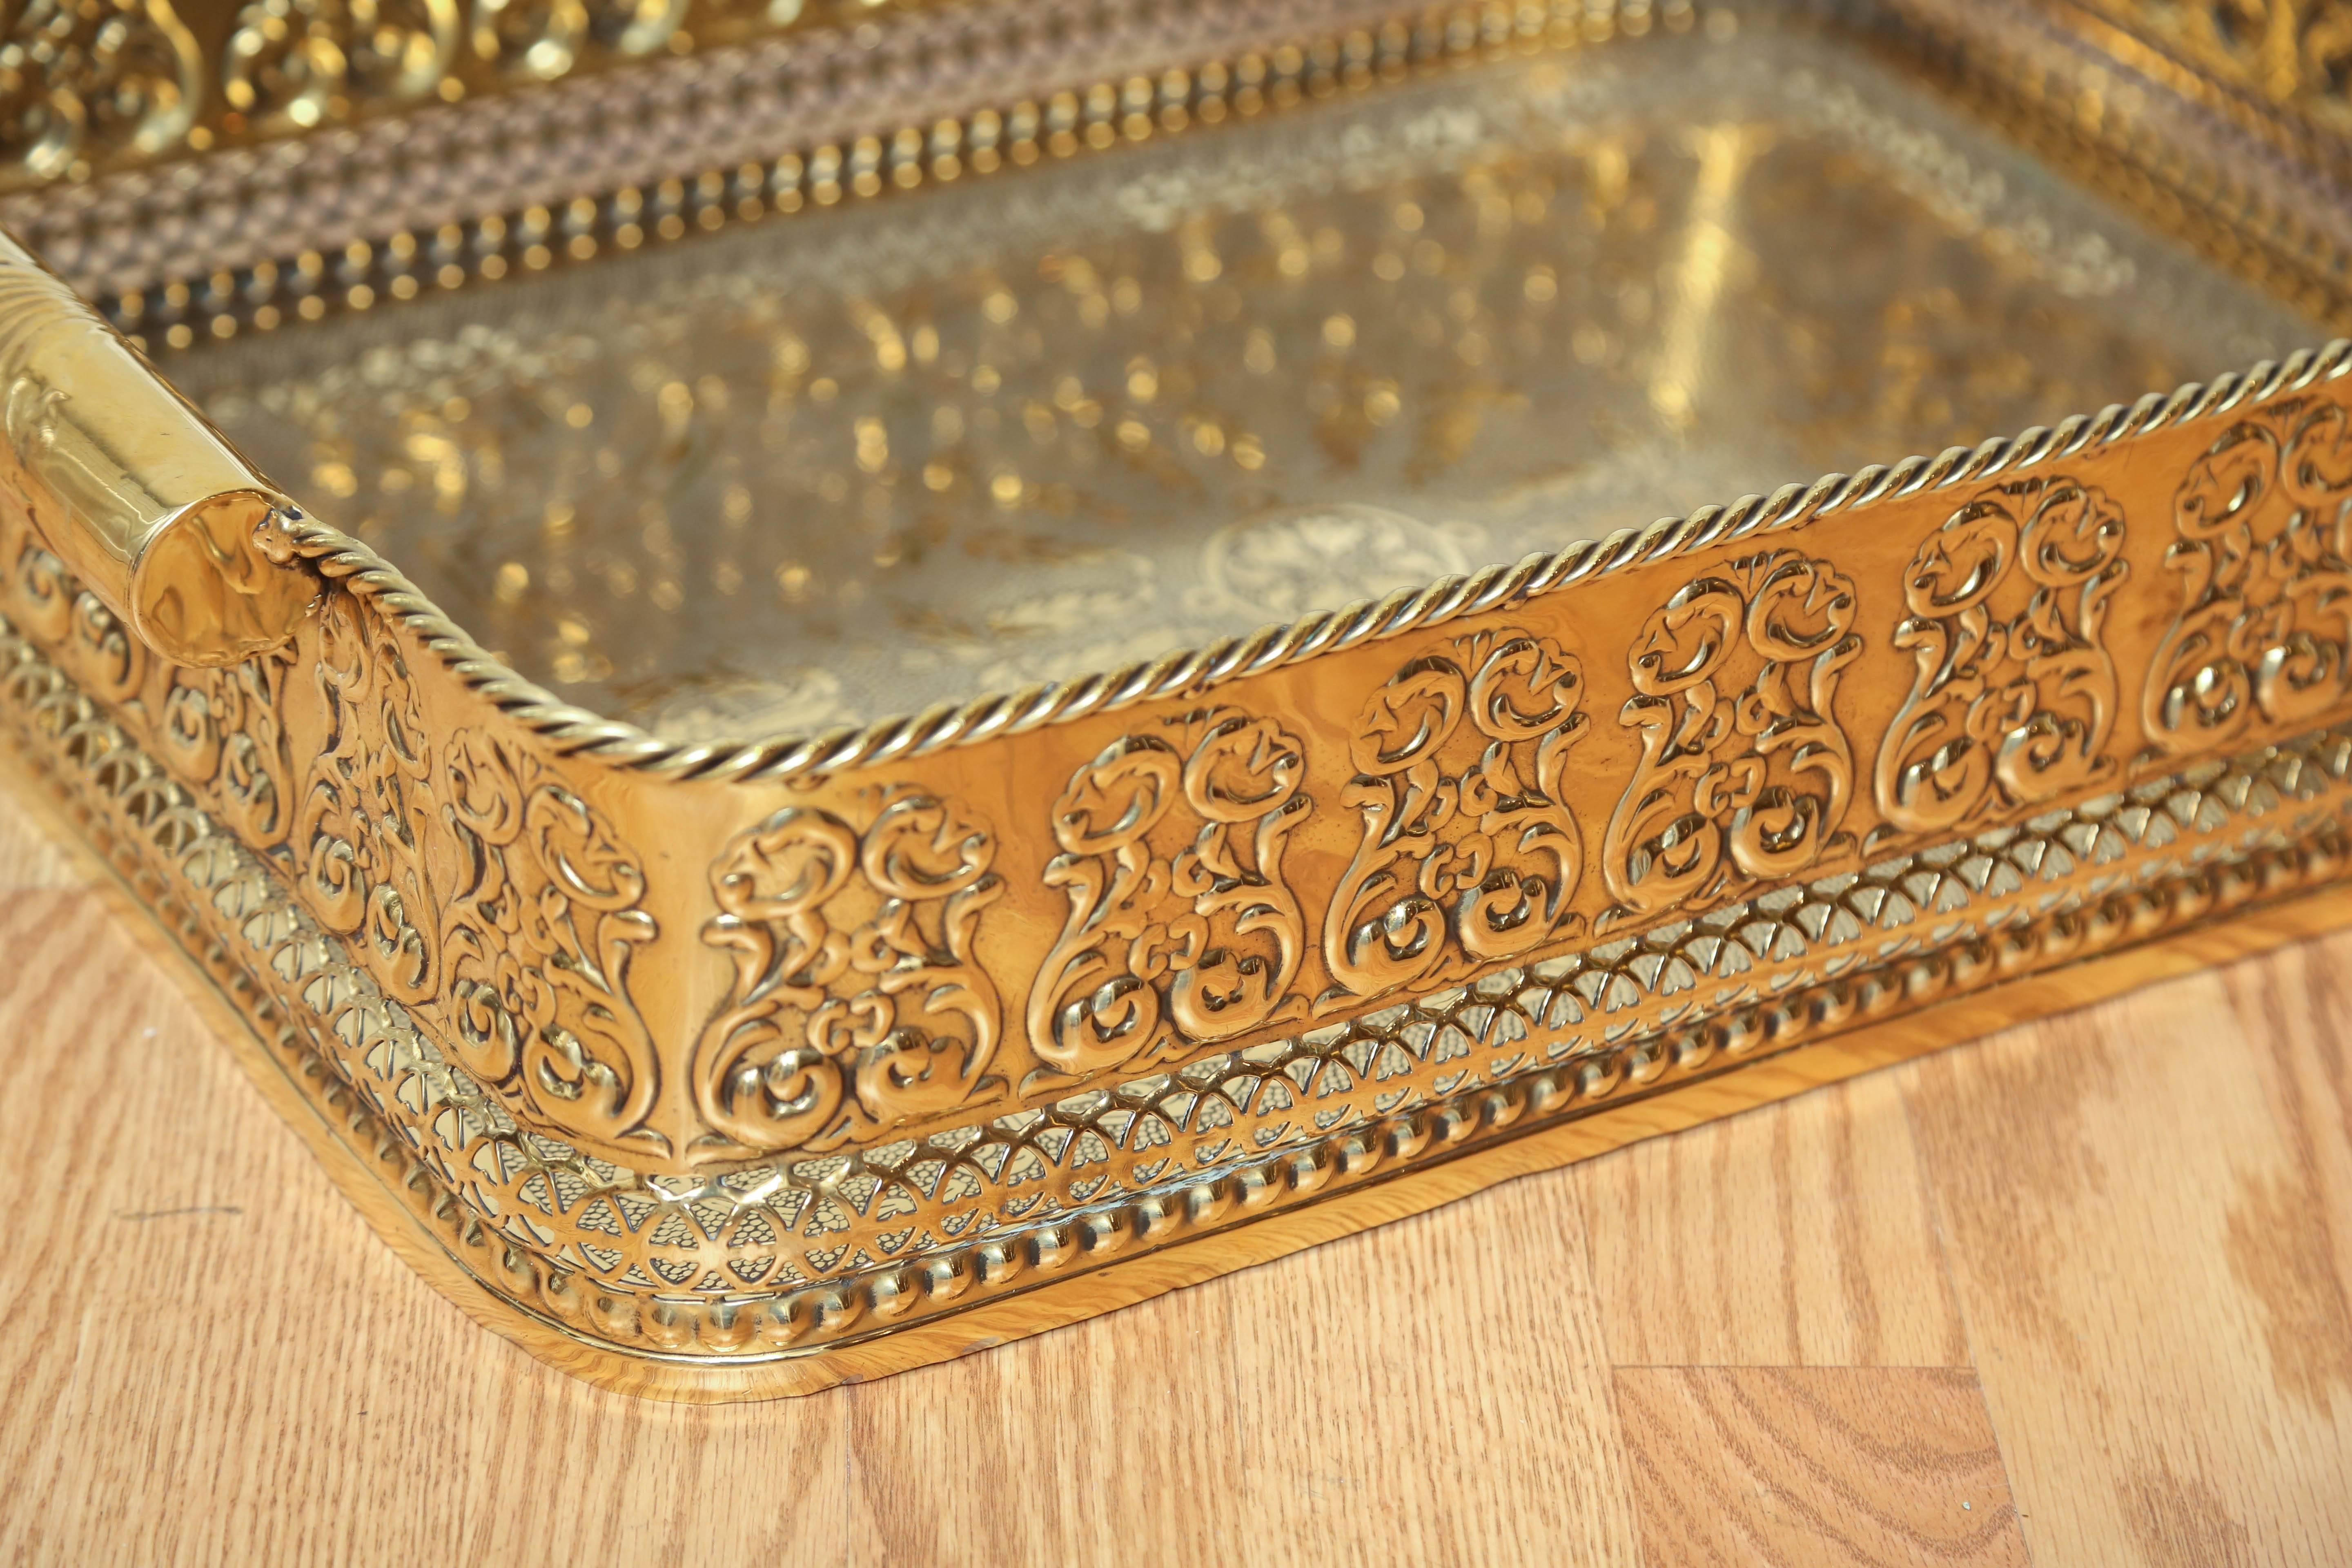 Large brass tray with beautiful etched detailing.